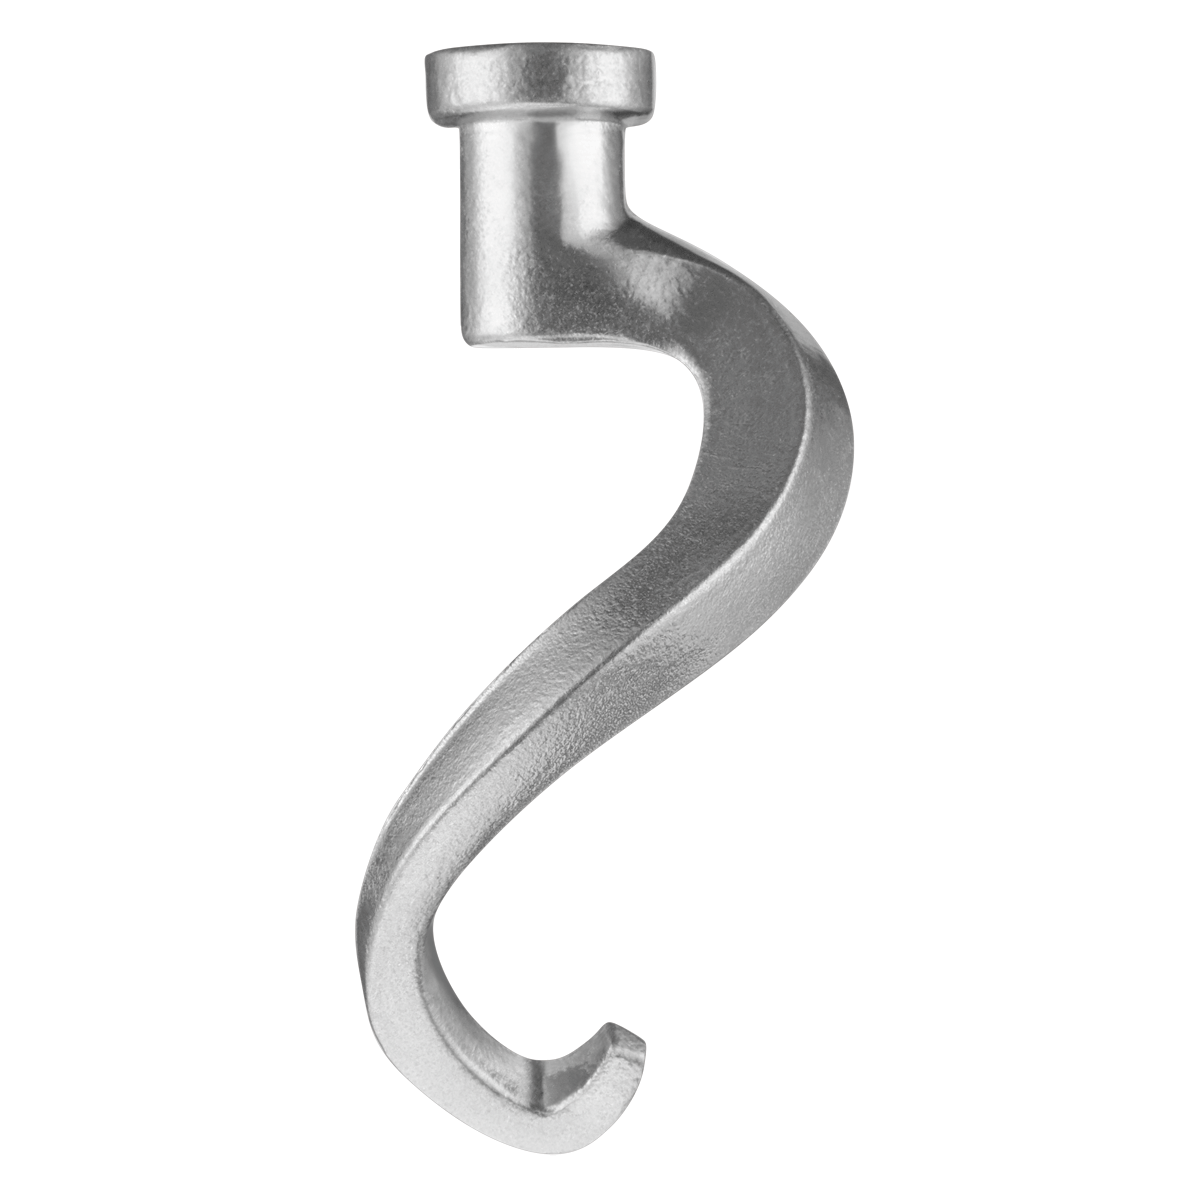 https://www.waringlab.com/assets/images/database/products/wsm10ldh-waring-lab-hook-main.png